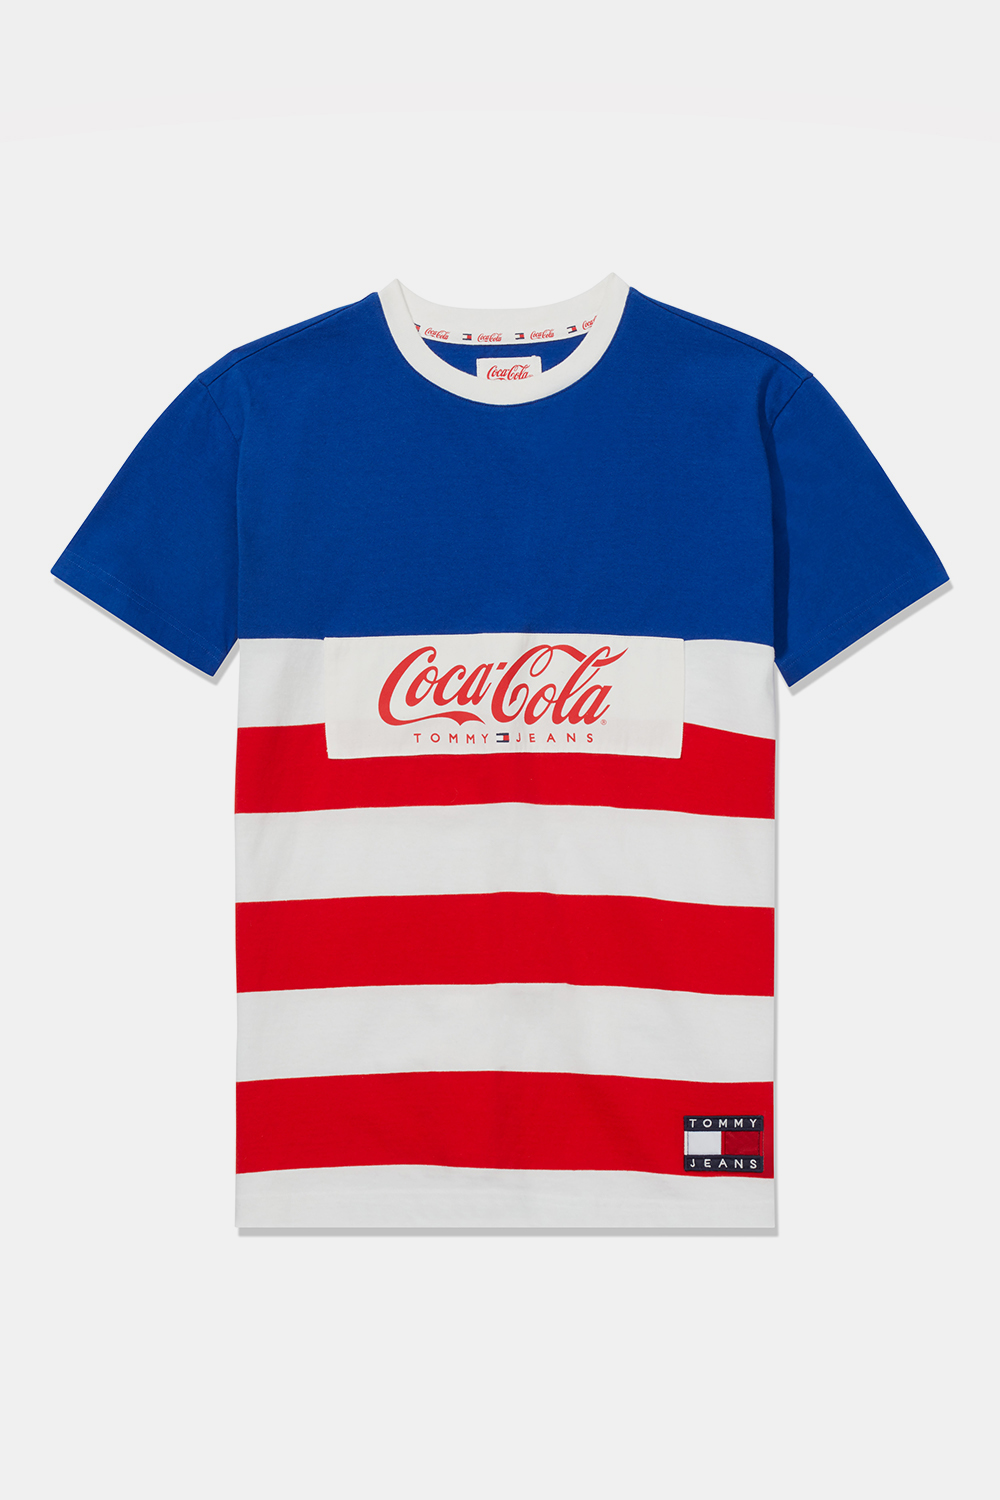 Jeans x Coca-Cola Collection: Shop Here